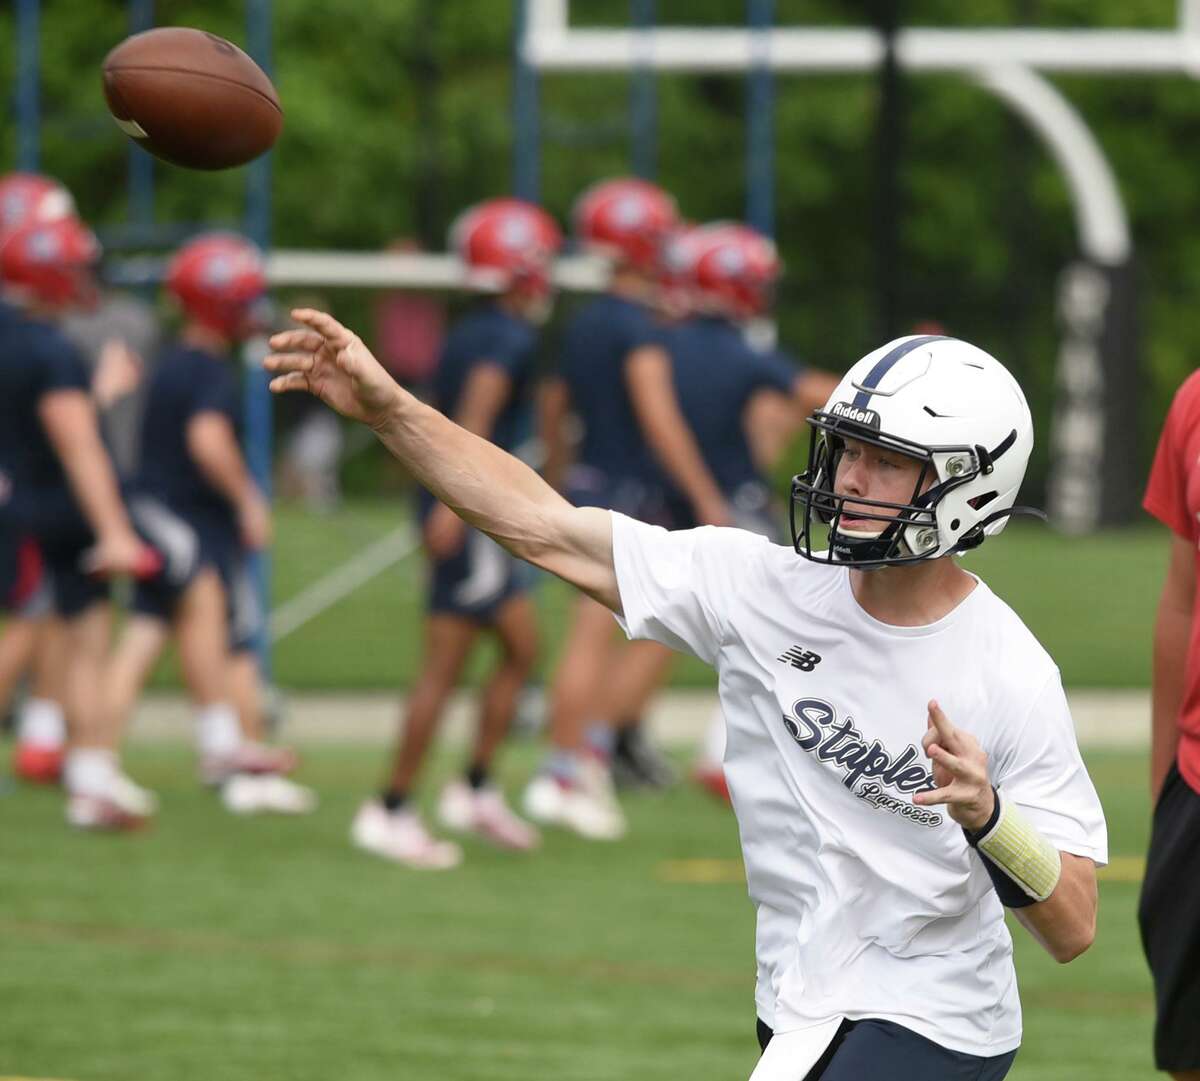 Staples’ quarterback Ryan Thompson throws a pass during Day 2 of the Grip It and Rip It football tournament in New Canaan on Saturday, July 10, 2021.